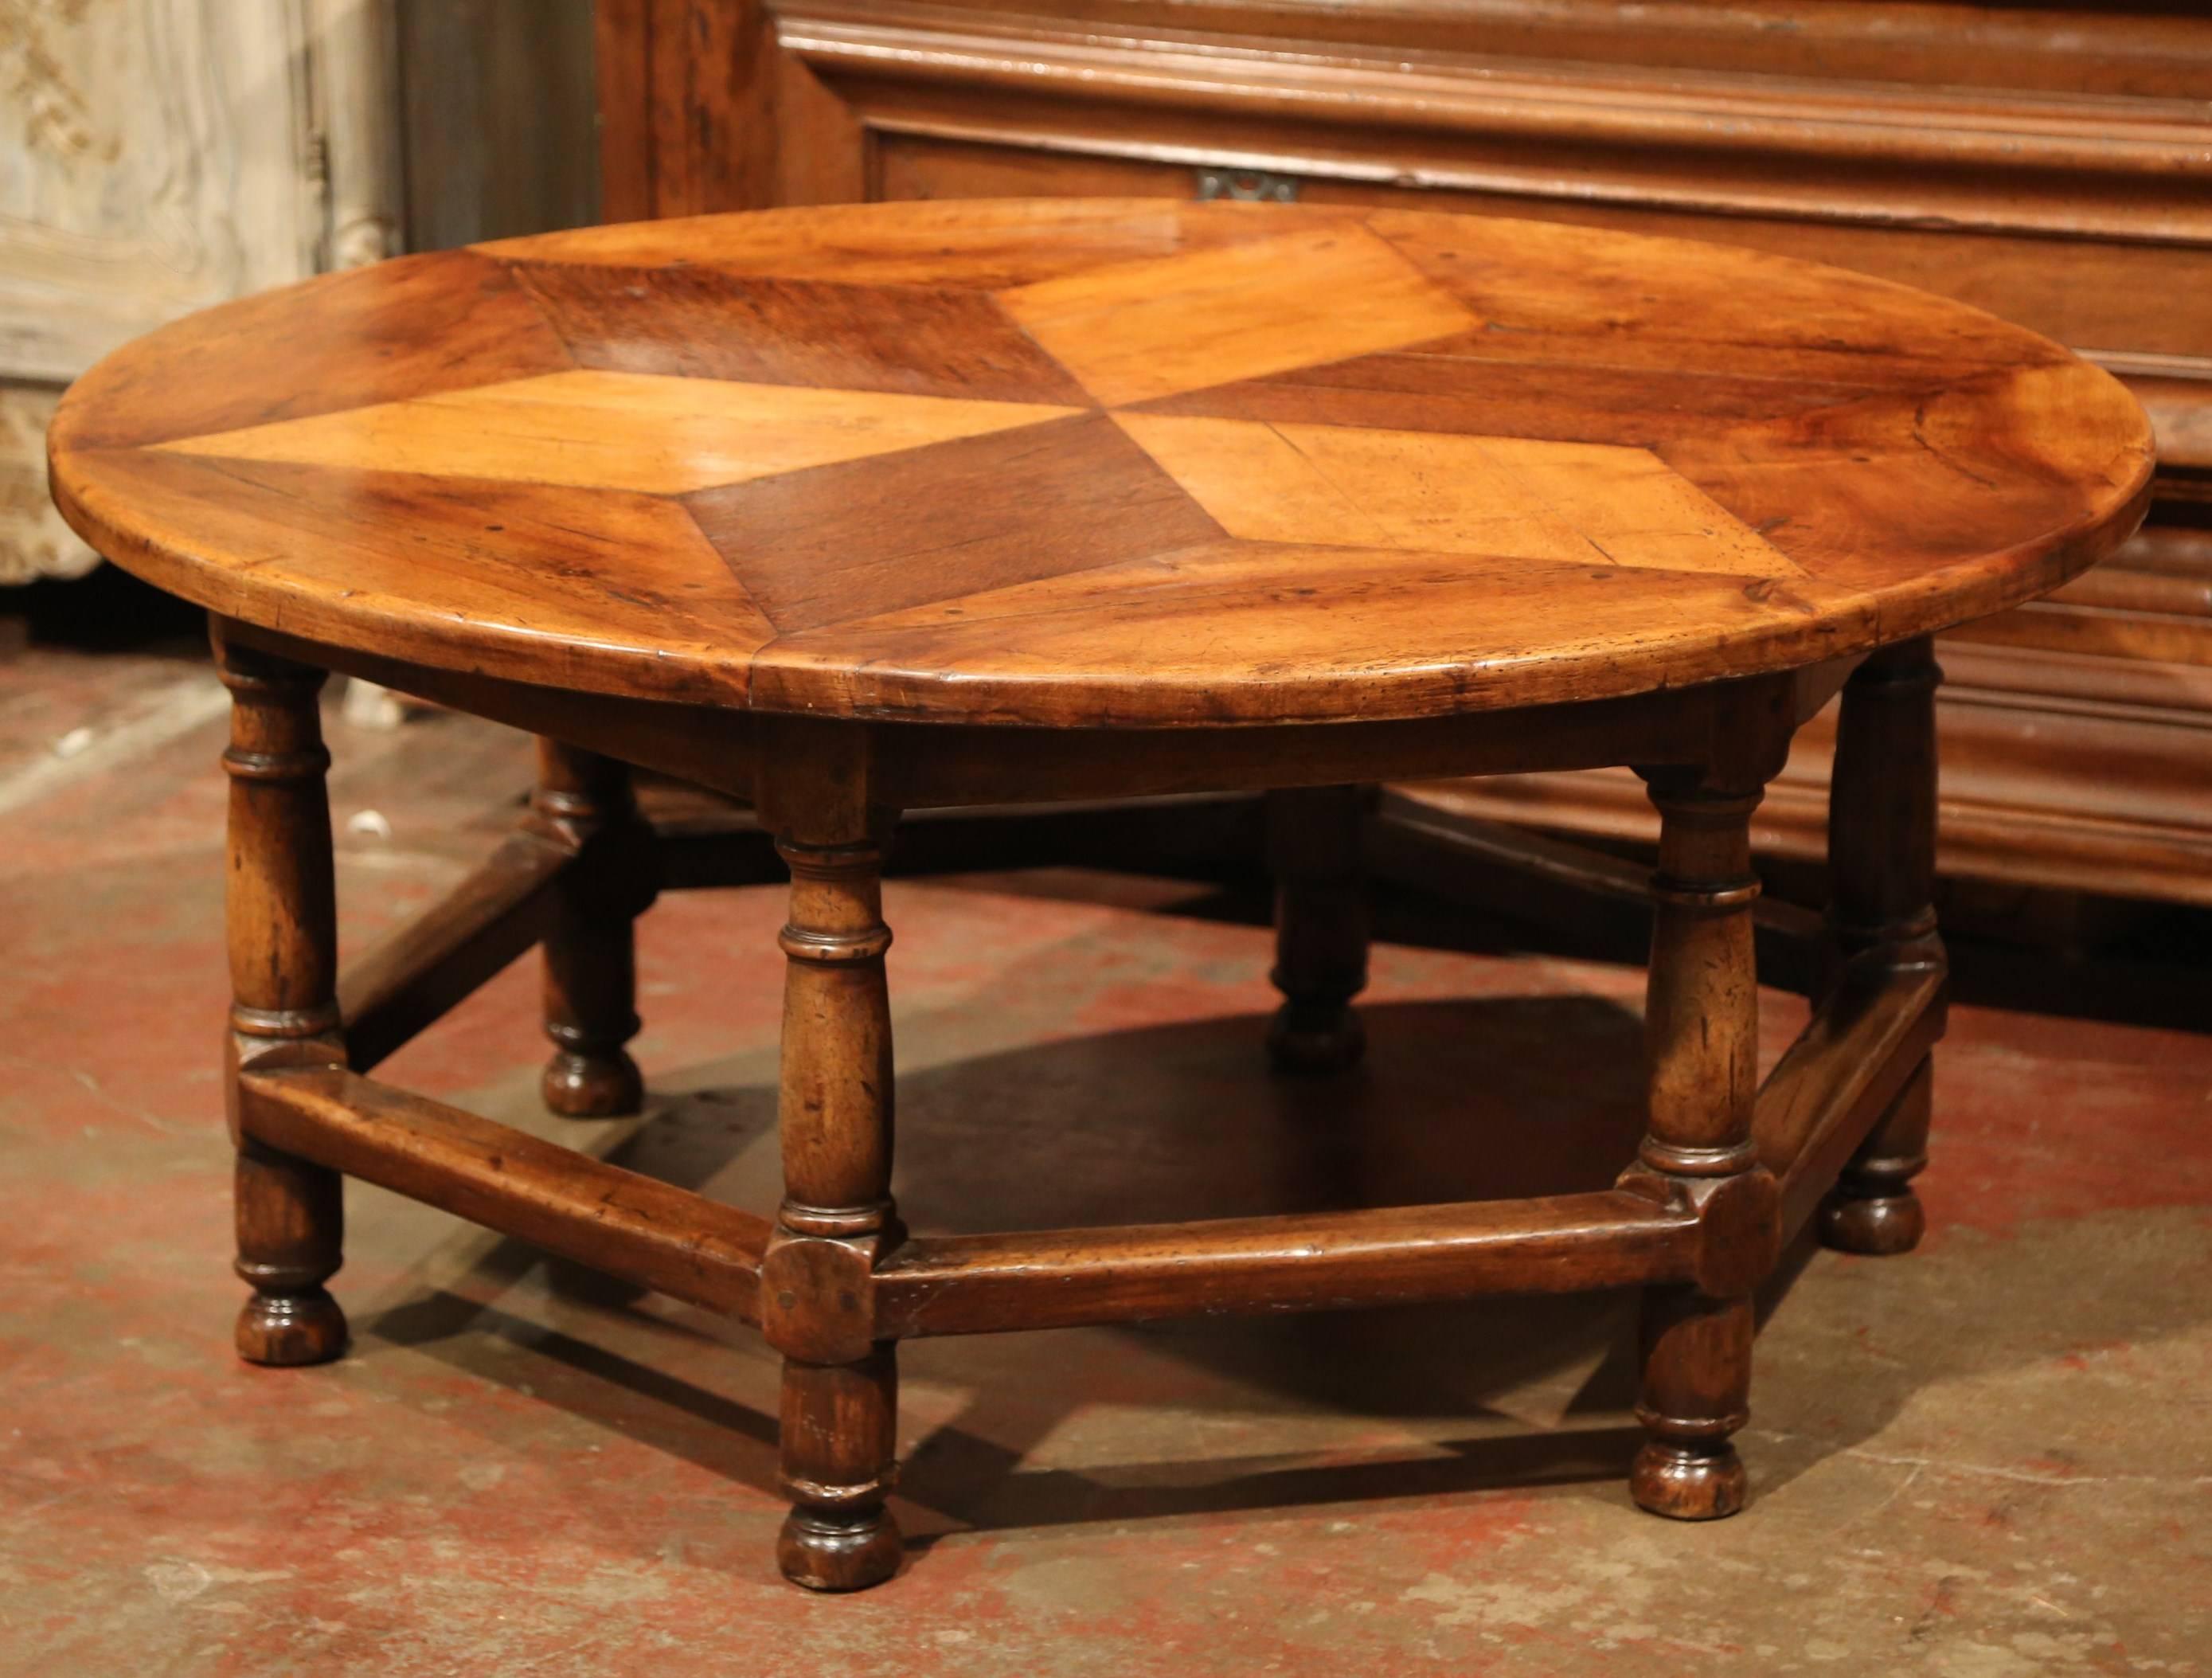 This elegant cocktail table was crafted in Southern France, circa 1970. The traditional, round coffee table features six turned legs with a hexagonal stretcher in between. The top is embellished with a geometric parquet design top. The surface is a